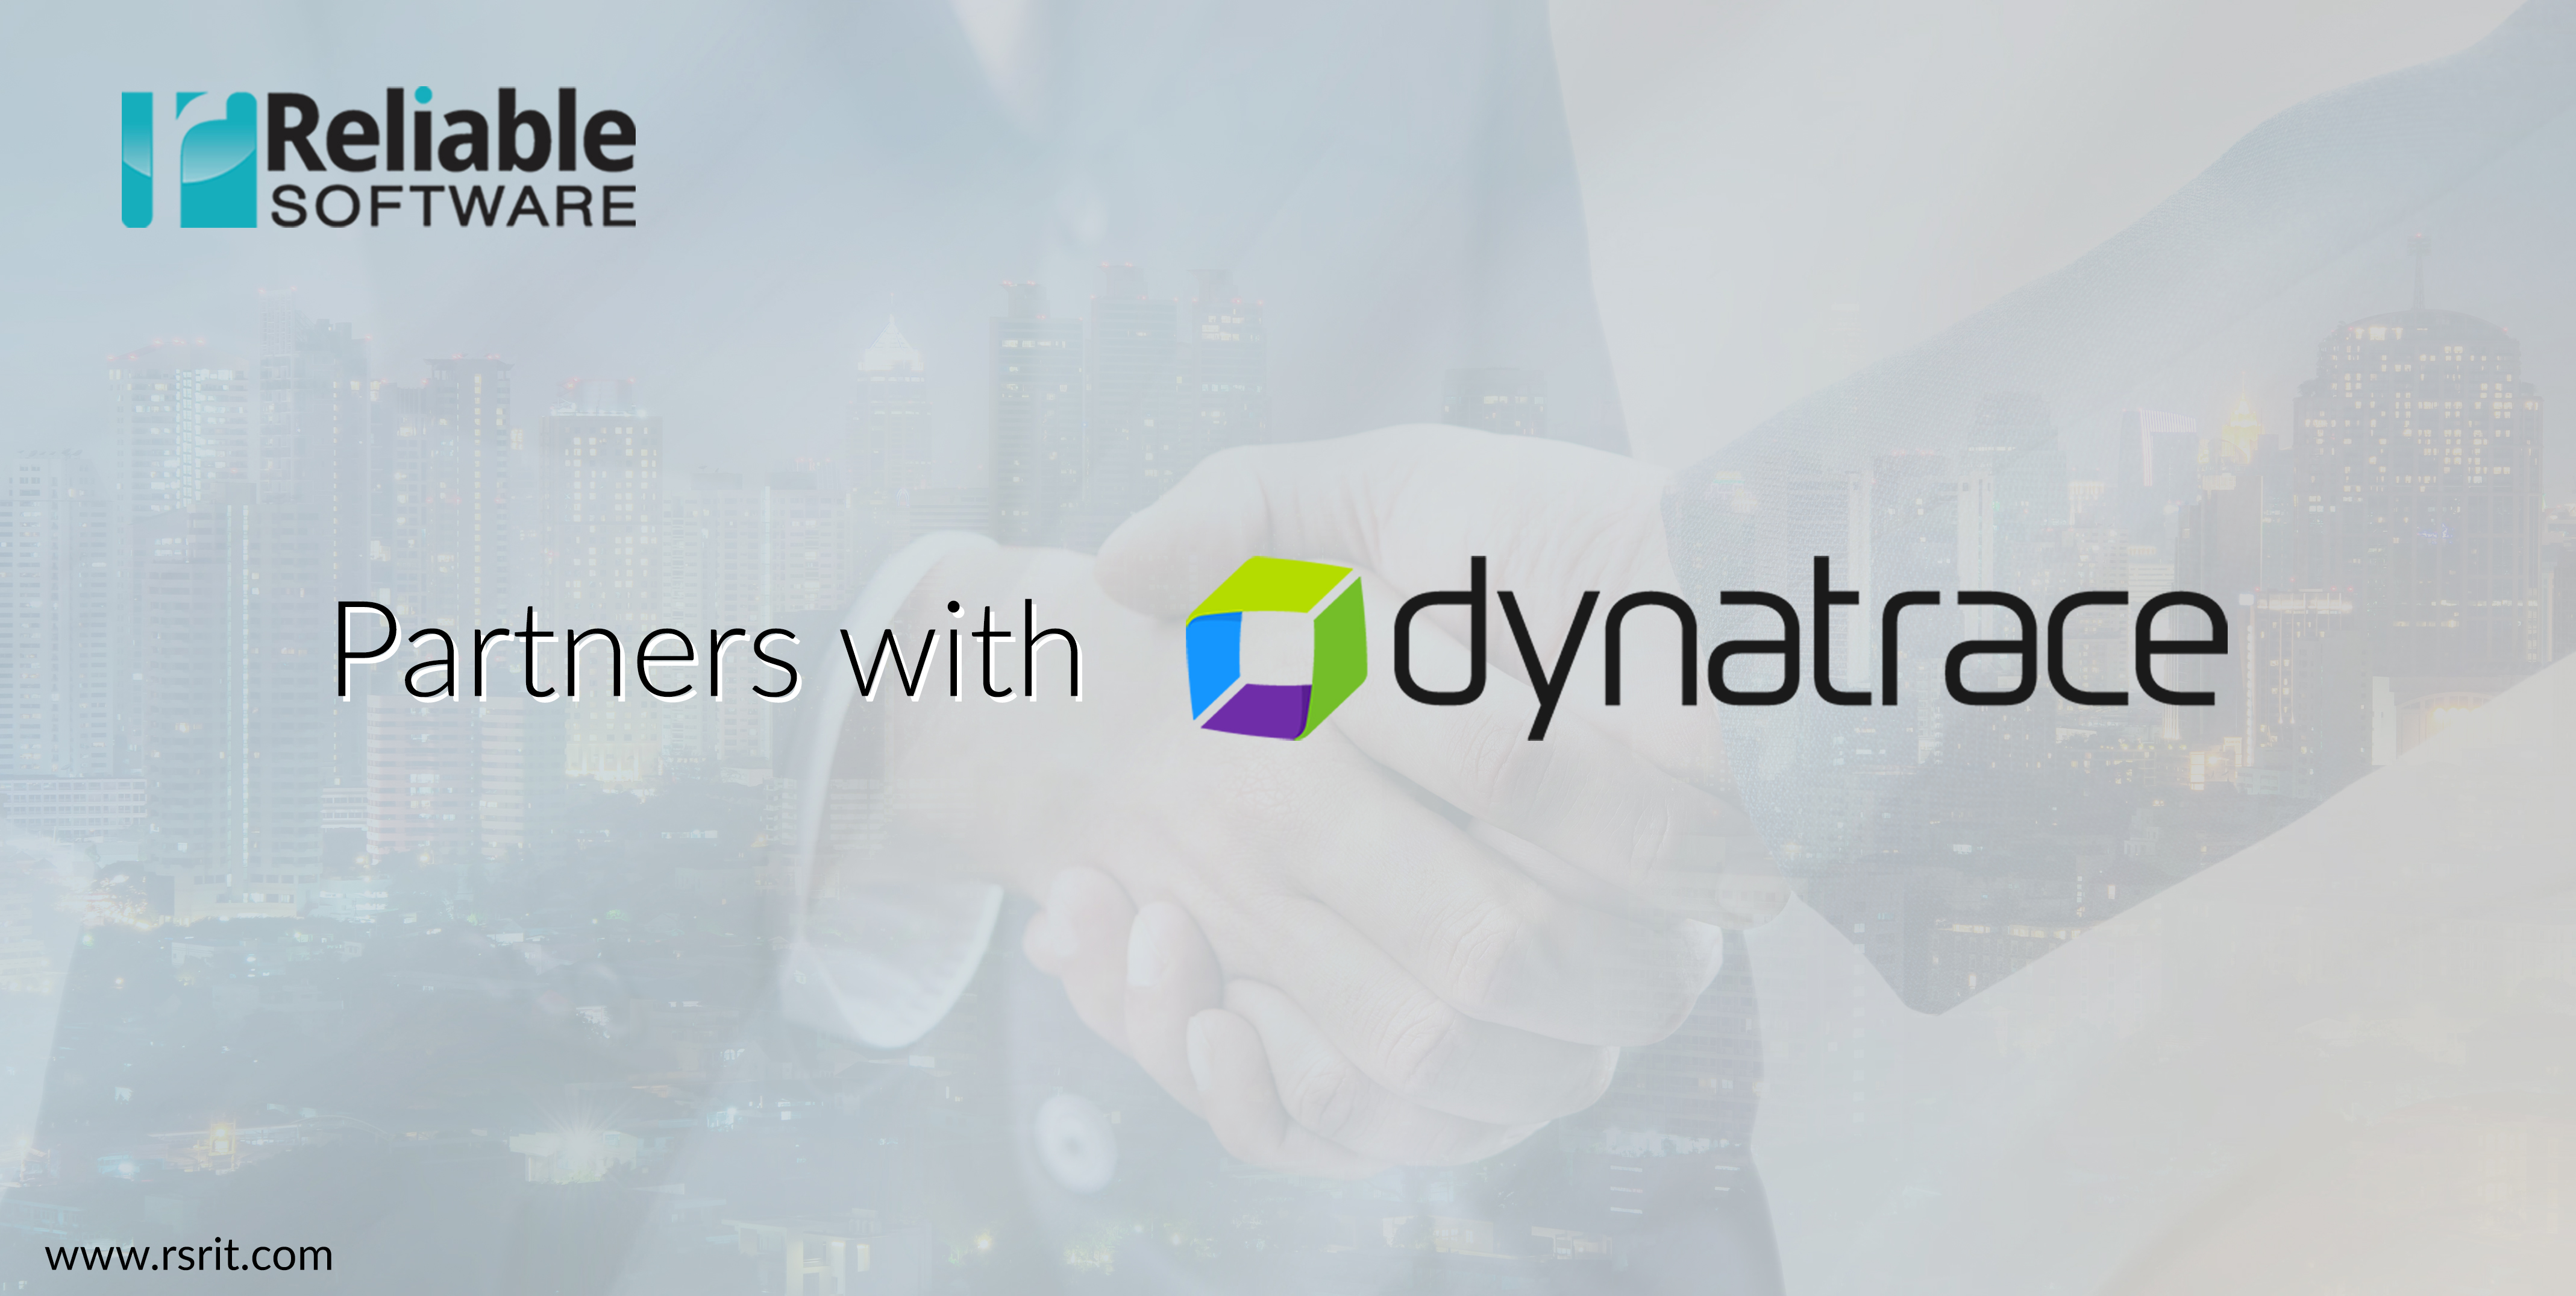 Reliable Software and Dynatrace Partner to automate IT operations in DevOps environments